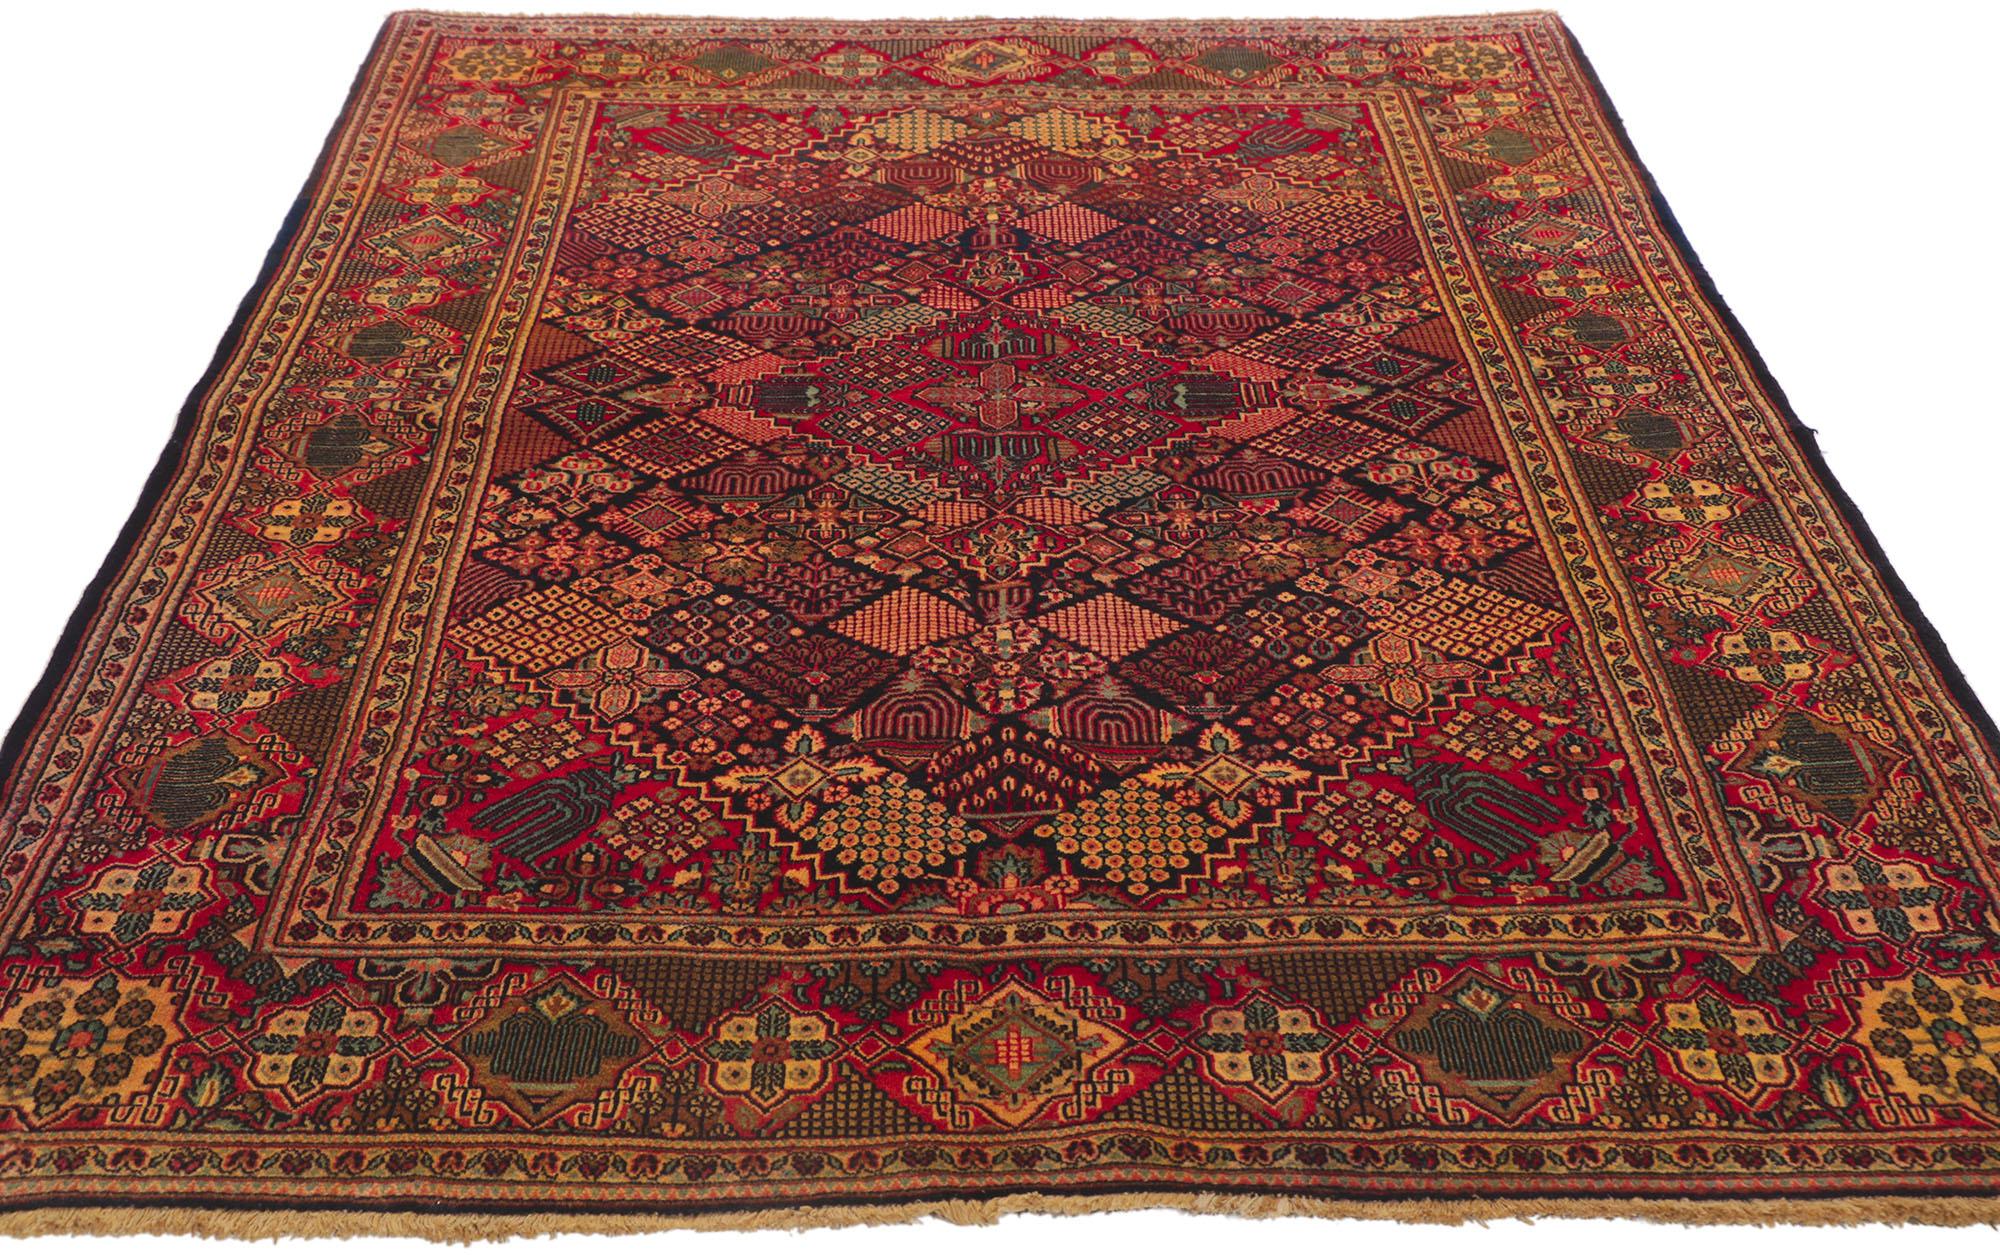 Hand-Knotted Antique Persian Kashan Rug with Joshegan Diamond Design and Jewel-Tone Colors For Sale